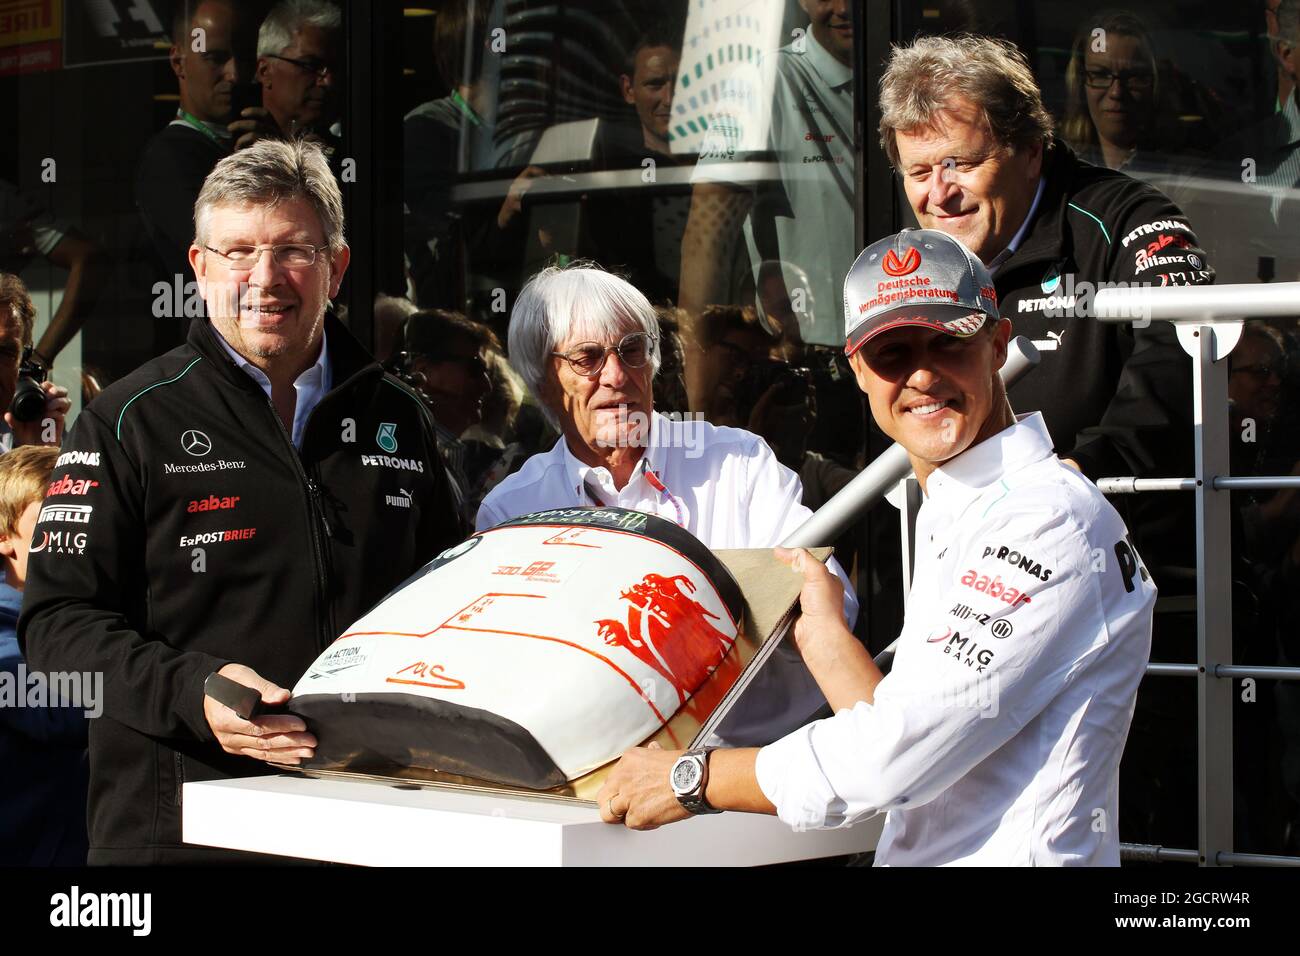 Michael Schumacher (GER) Mercedes AMG F1 celebrates his 300th GP with Ross Brawn (GBR) Mercedes AMG F1 Team Principal; Bernie Ecclestone (GBR) CEO Formula One Group (FOM) and Norbert Haug (GER) Mercedes Sporting Director. Belgian Grand Prix, Saturday 1st September 2012. Spa-Francorchamps, Belgium. Stock Photo